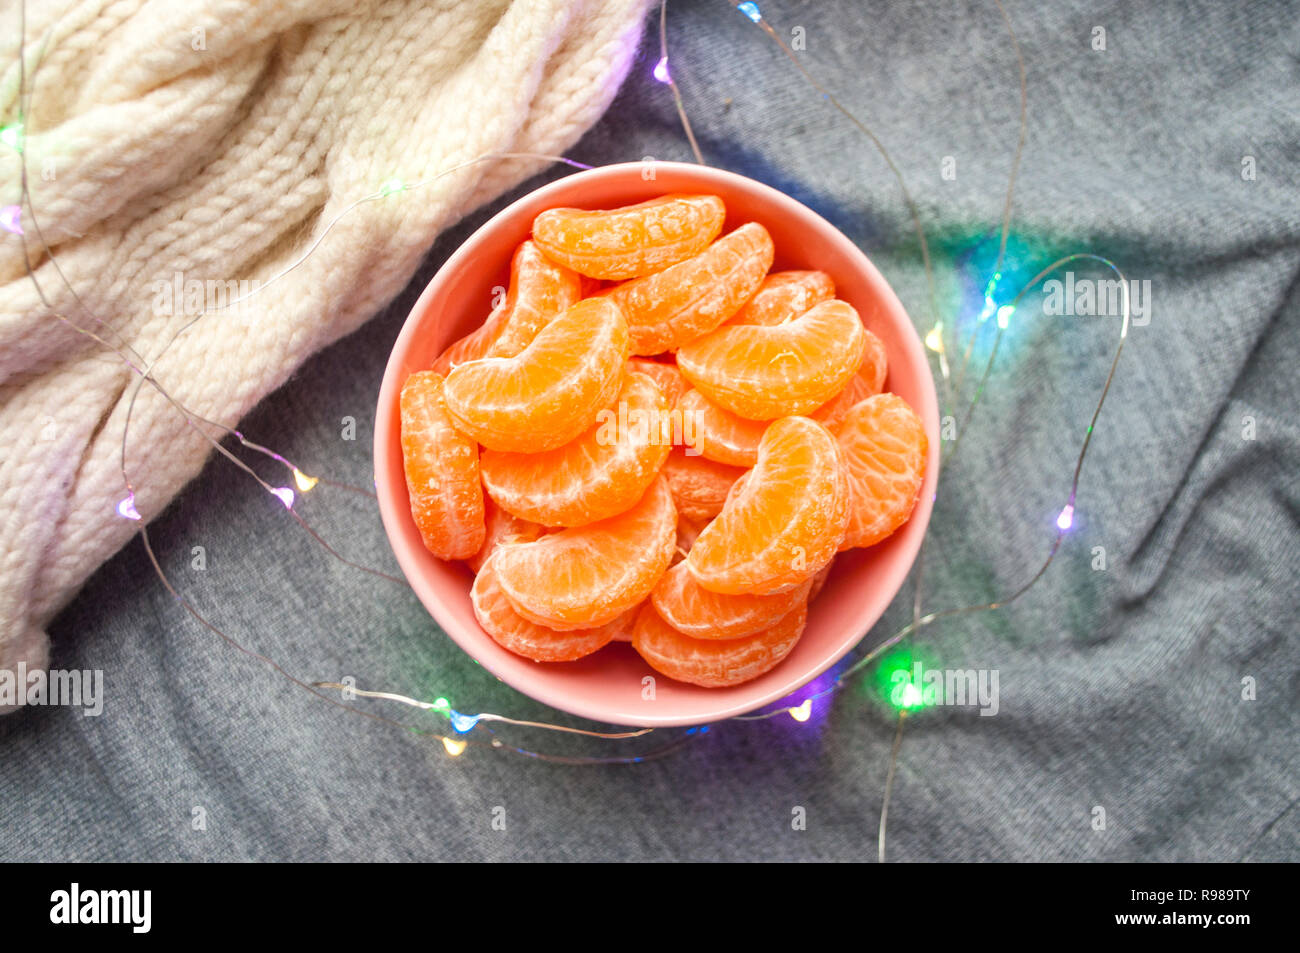 Flat lay of pink bowl full of peeled sweet tangerines on grey and white knitted background with garland lights. Stock Photo